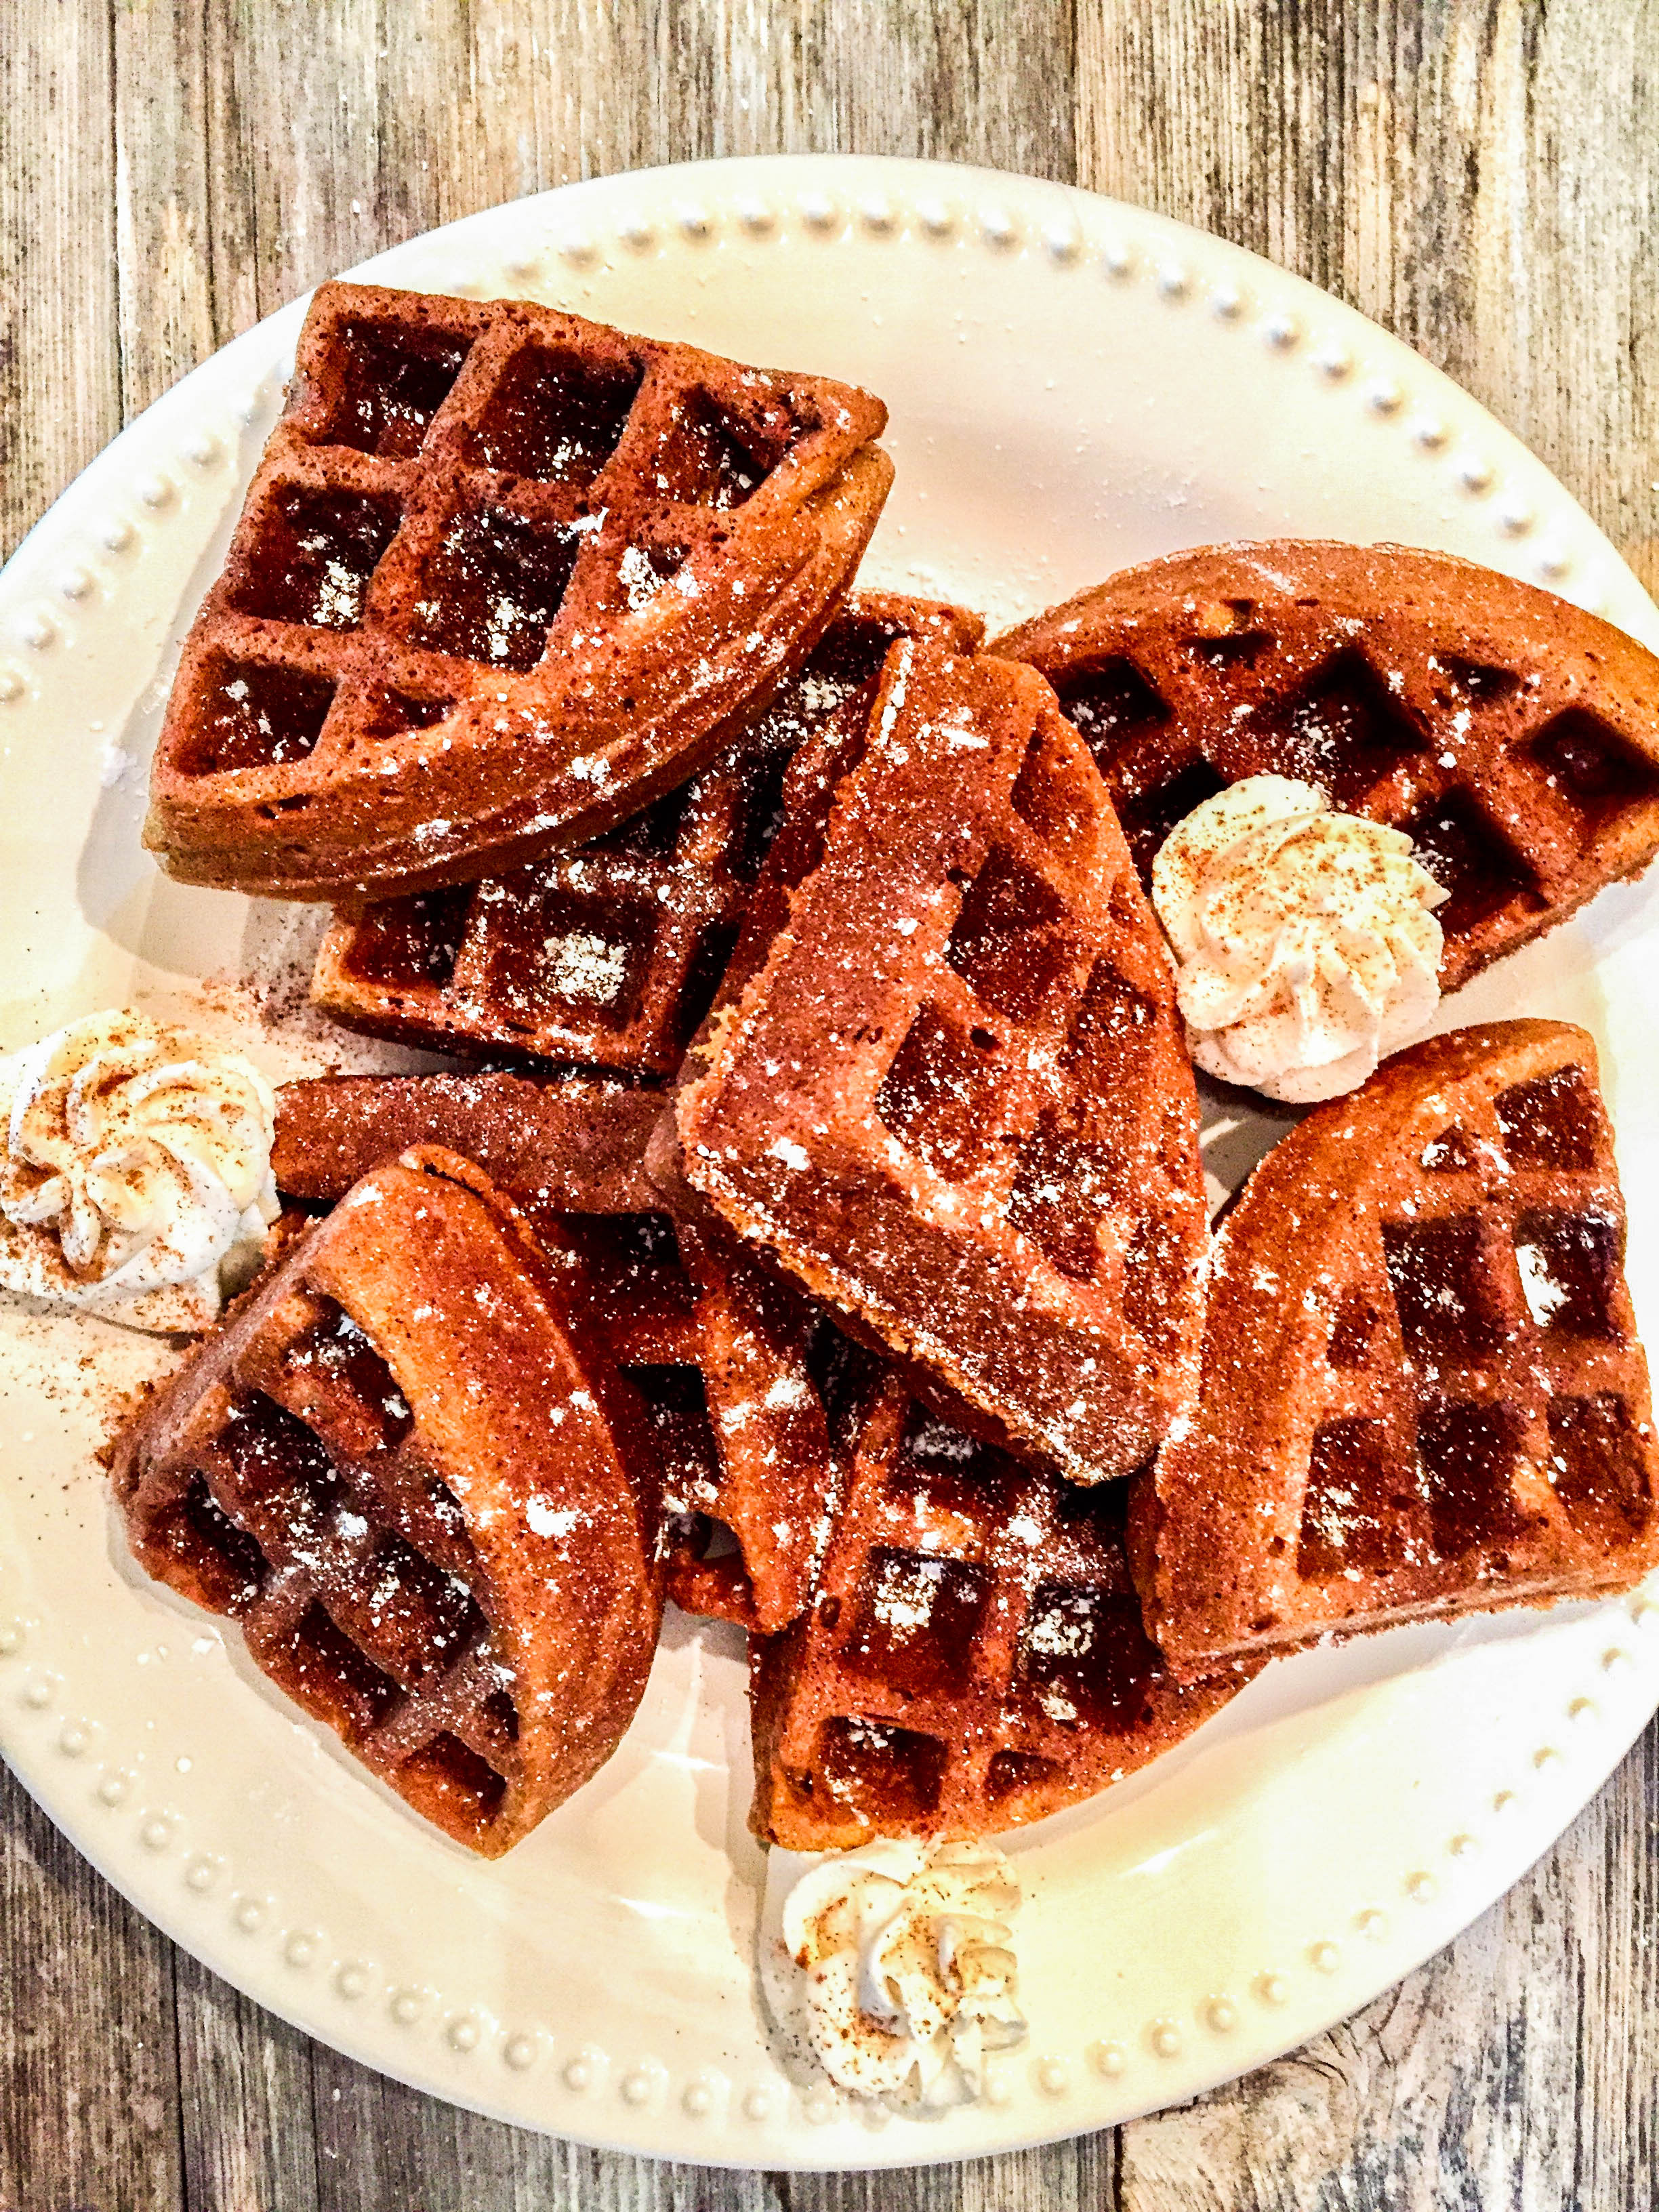 Gingerbread Waffles with Cinnamon Whipped Cream - A Hint of Wine